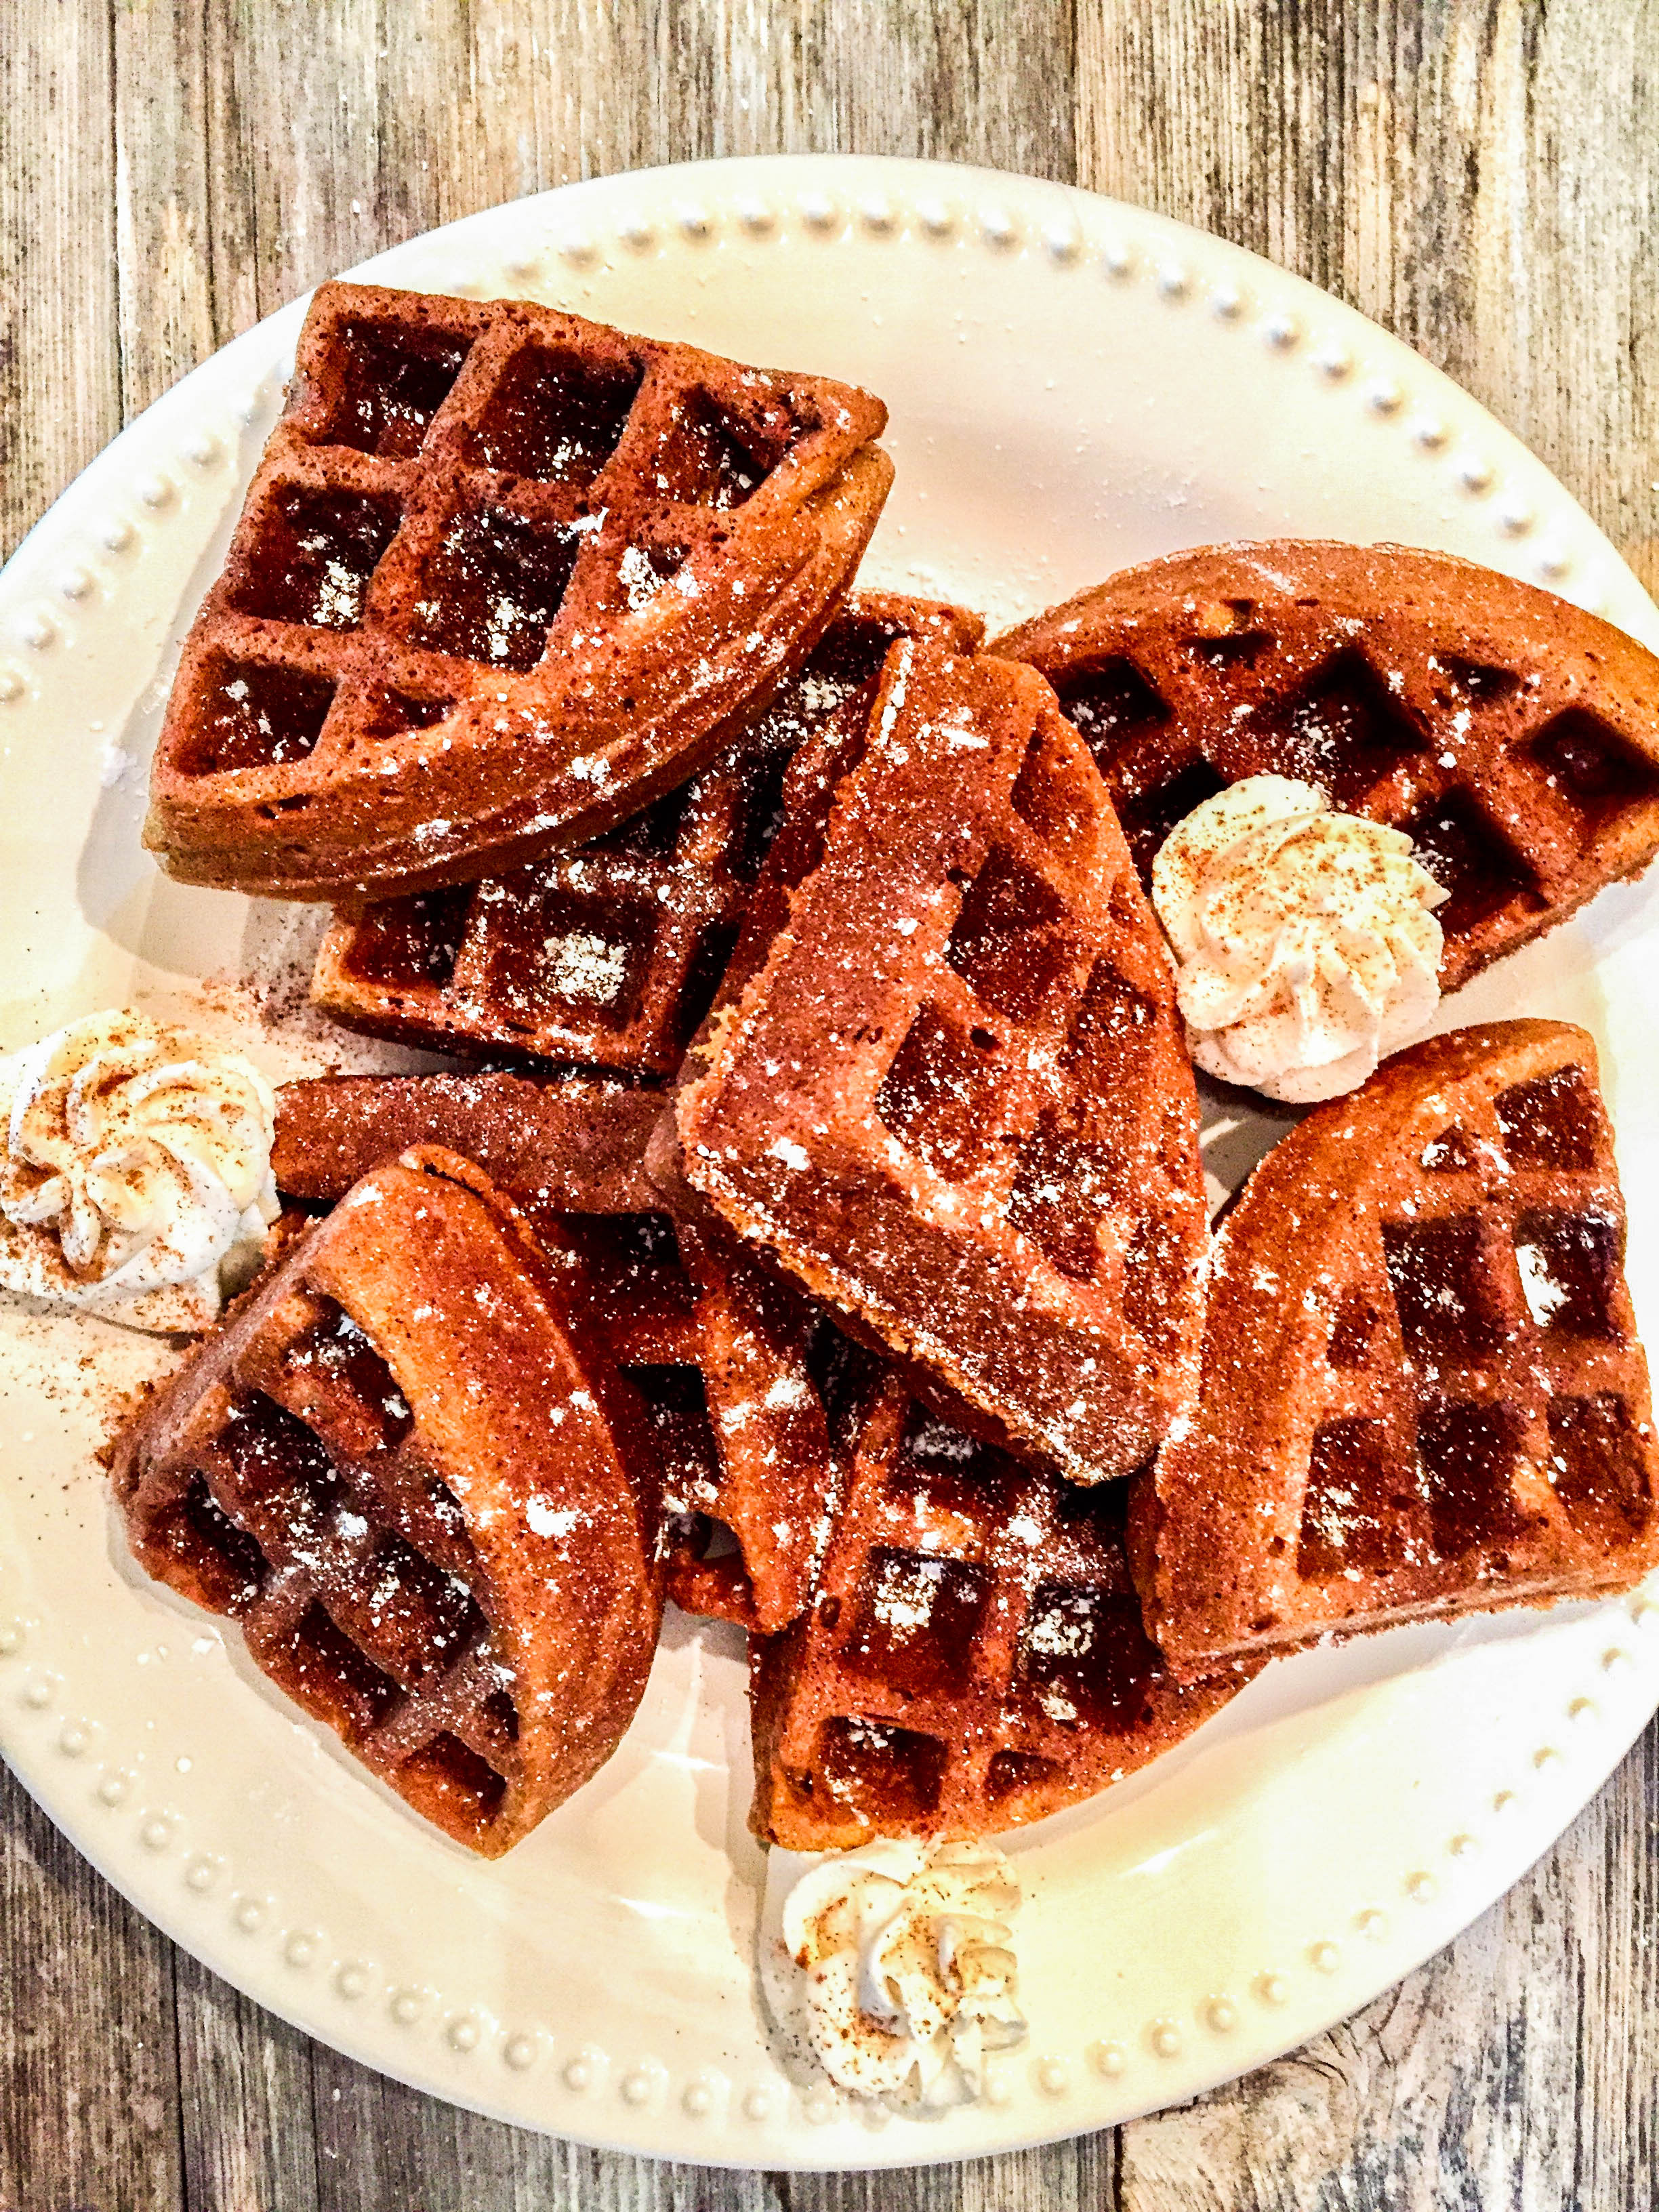 Gingerbread Waffles with Cinnamon Whipped Cream - A Hint of Wine